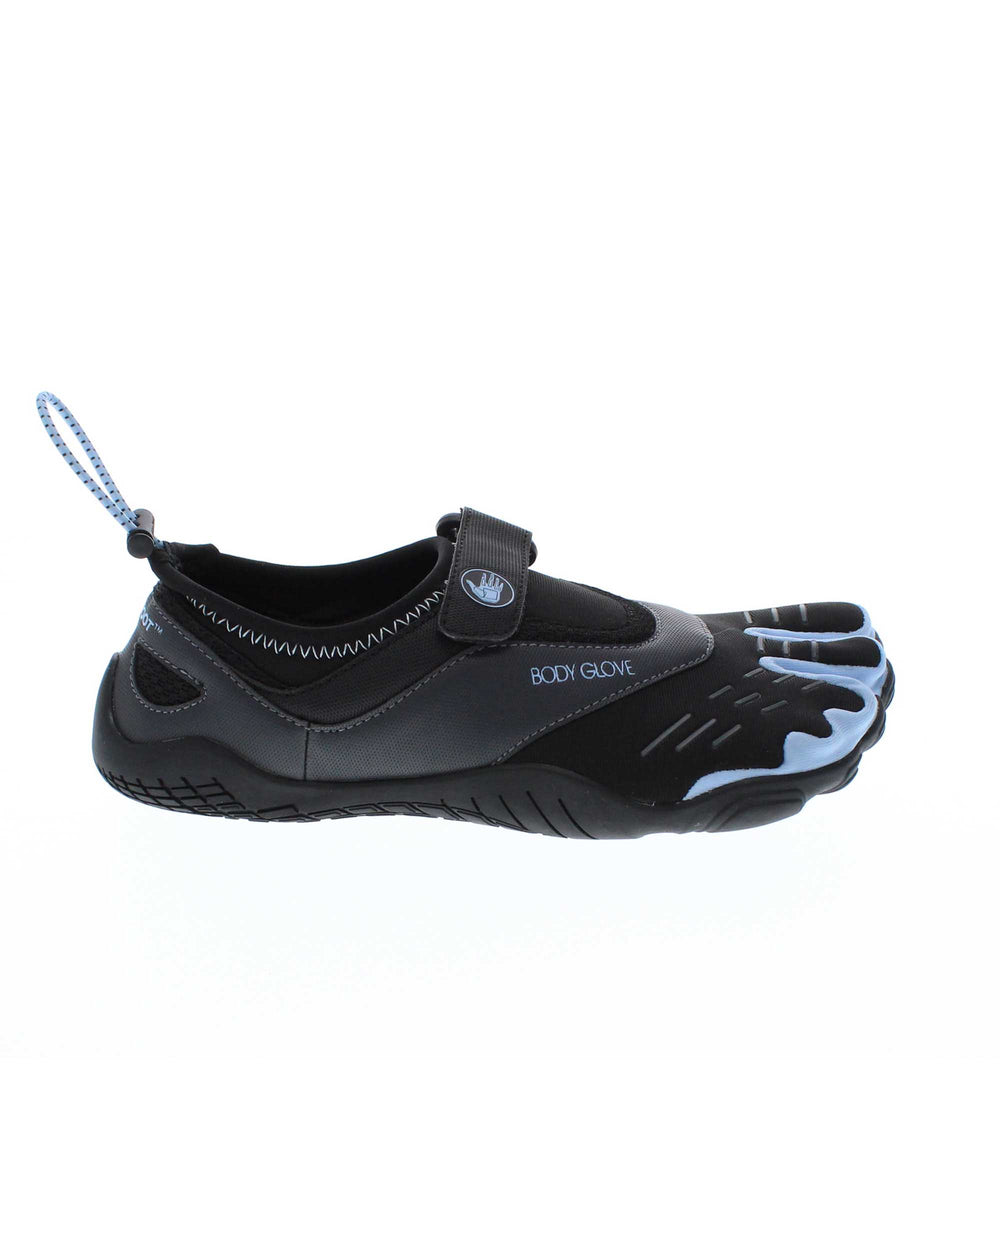 Women's 3T Barefoot Max Water Shoes - Black/Sky